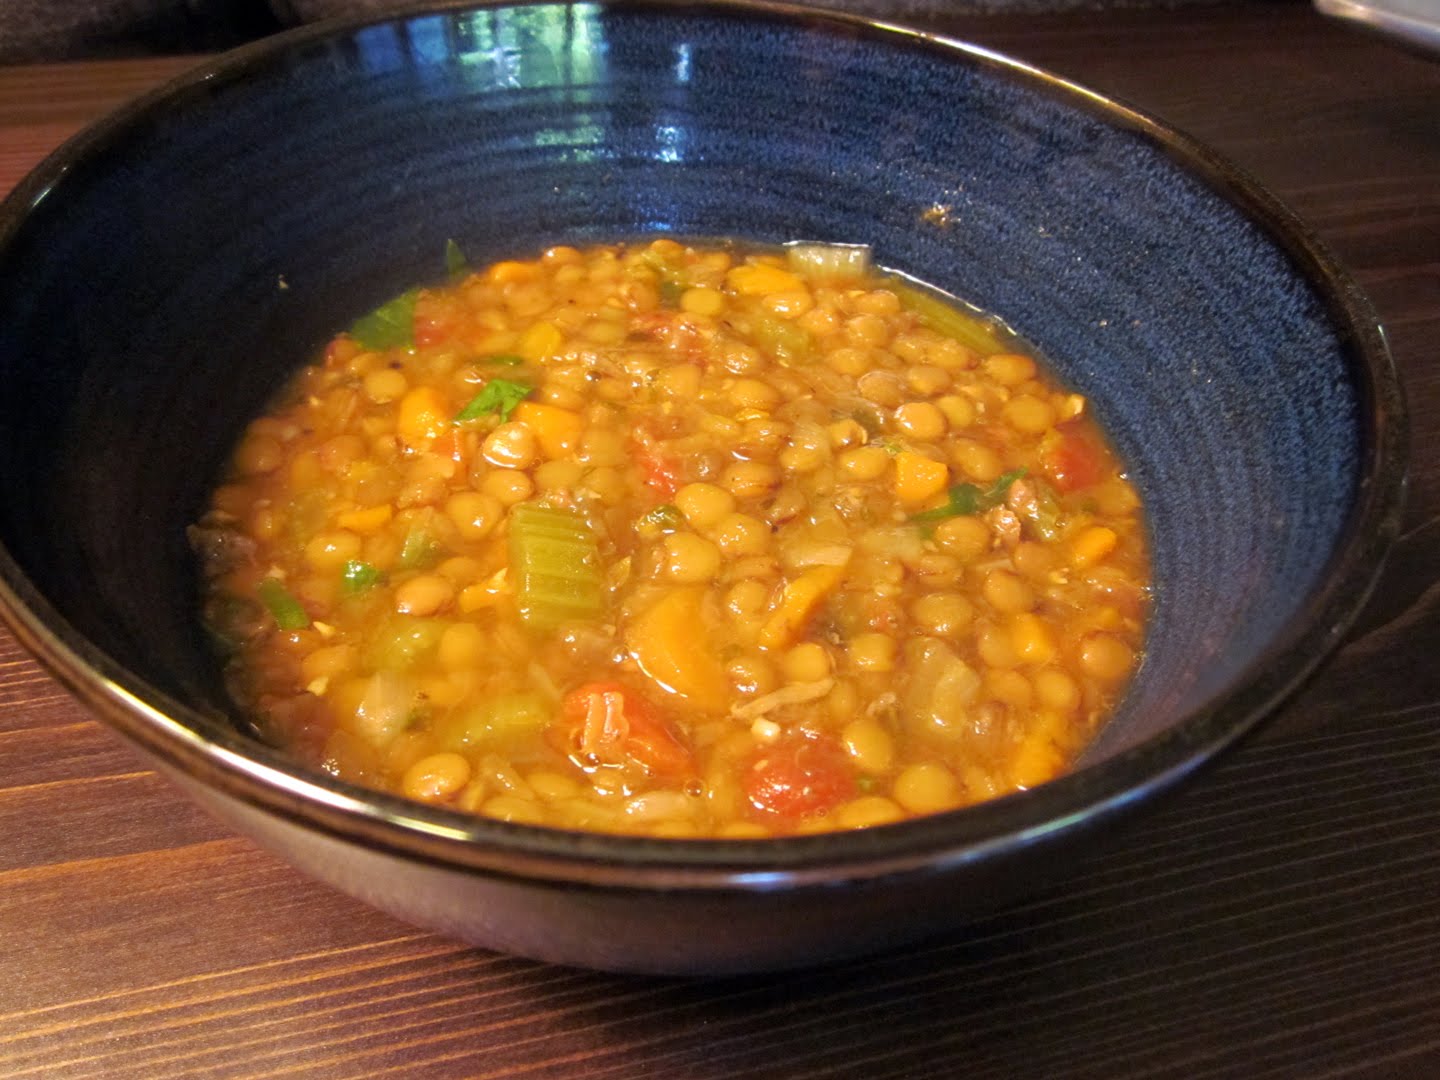 h*t I Bake: Lentil Soup made with Homemade Lamb Stock